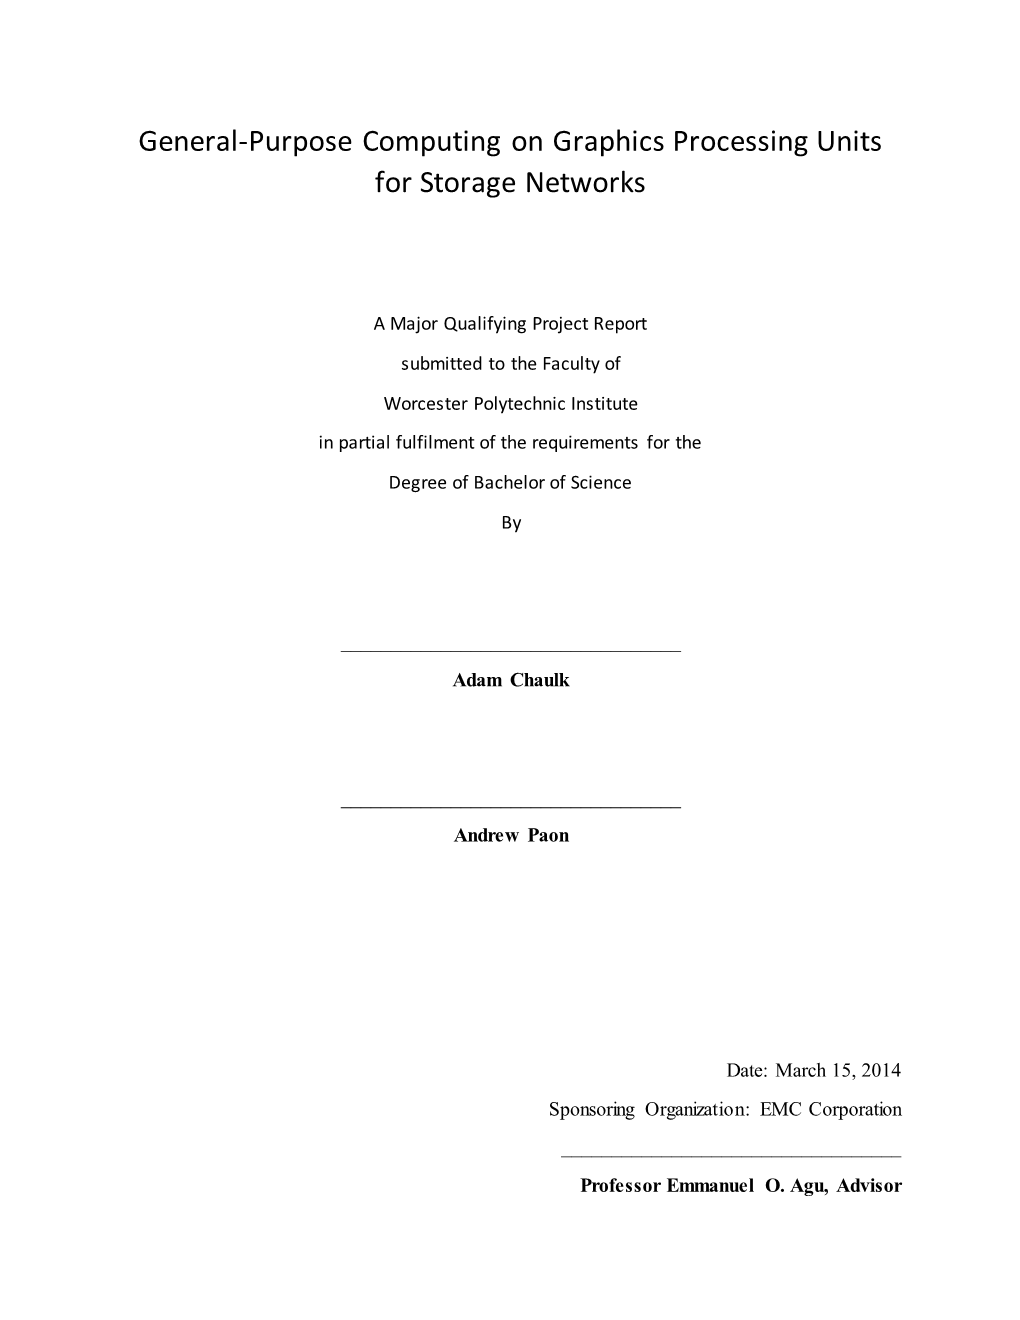 General-Purpose Computing on Graphics Processing Units for Storage Networks